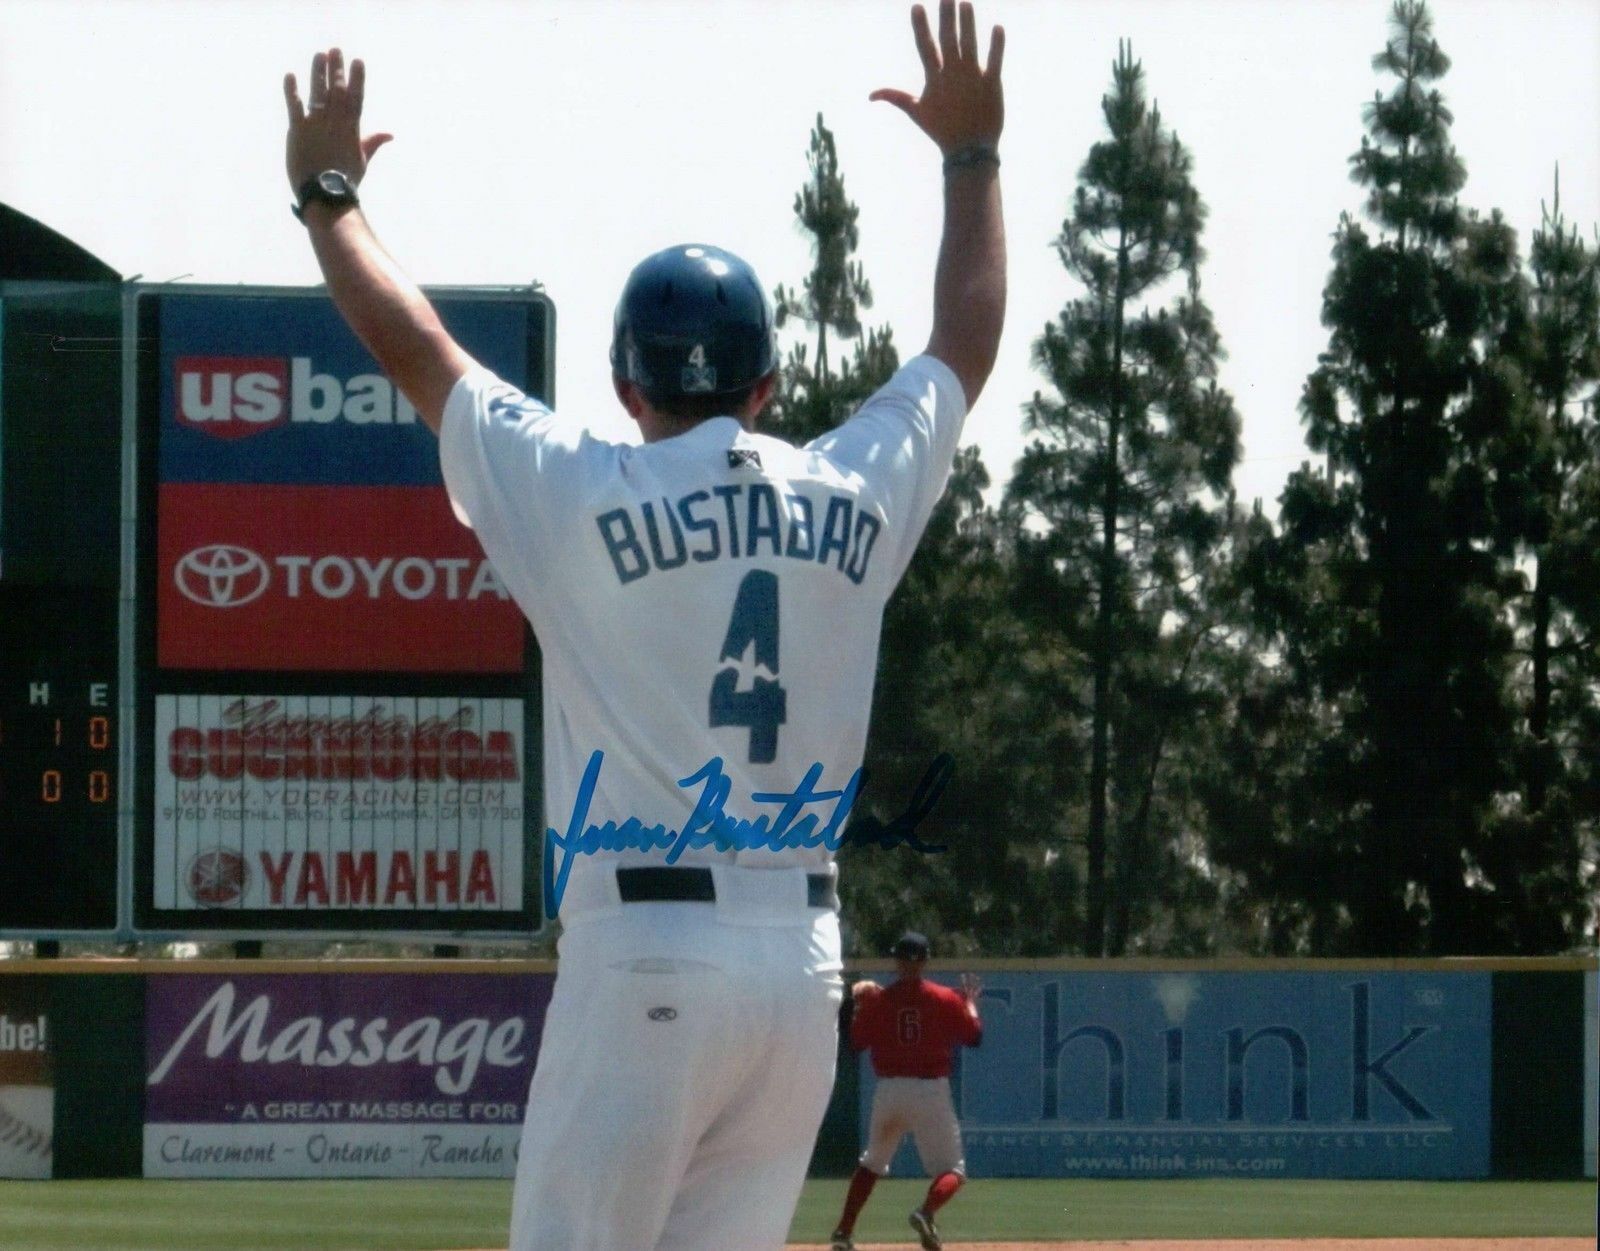 Juan Bustabad Signed 8X10 Photo Poster painting Autograph Dodgers Quakes Hold Sign Auto w/COA